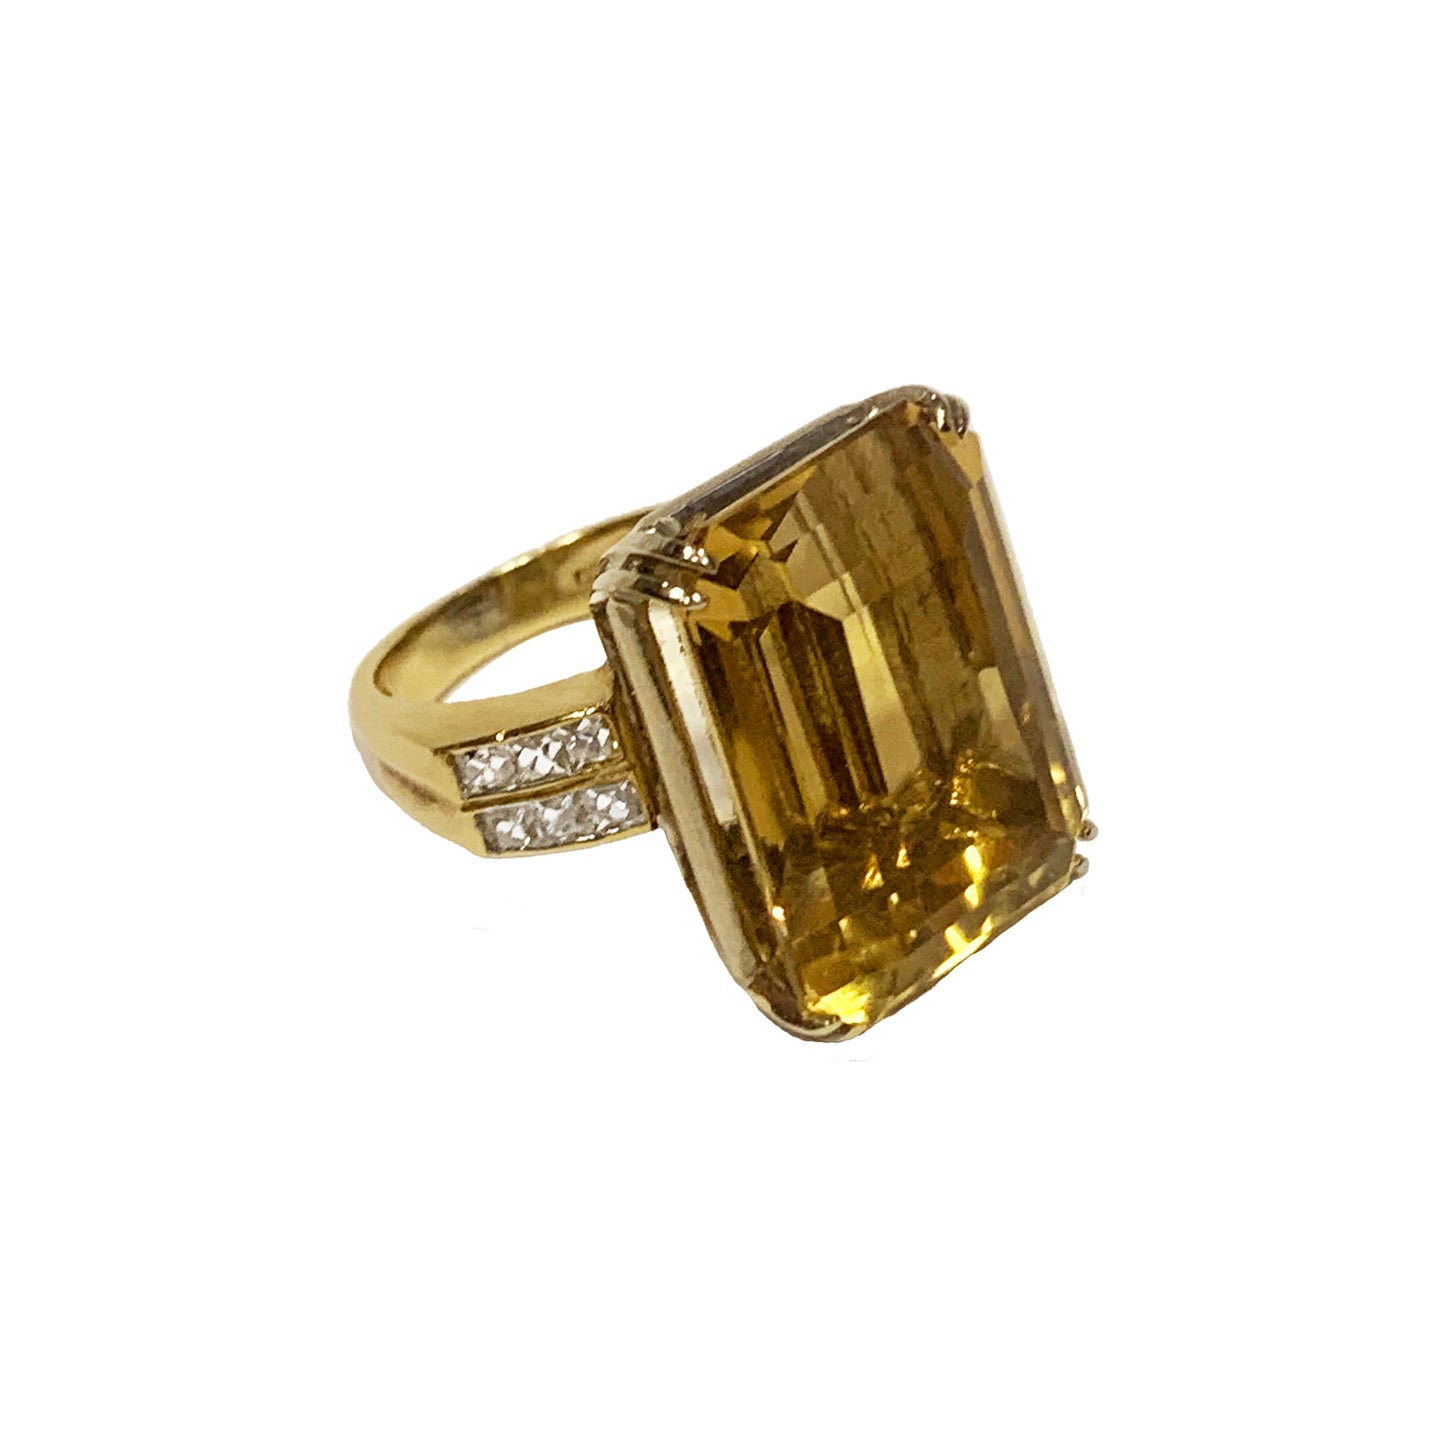 1940s 18KT Yellow Gold Citrine & Diamond Cocktail Ring front side